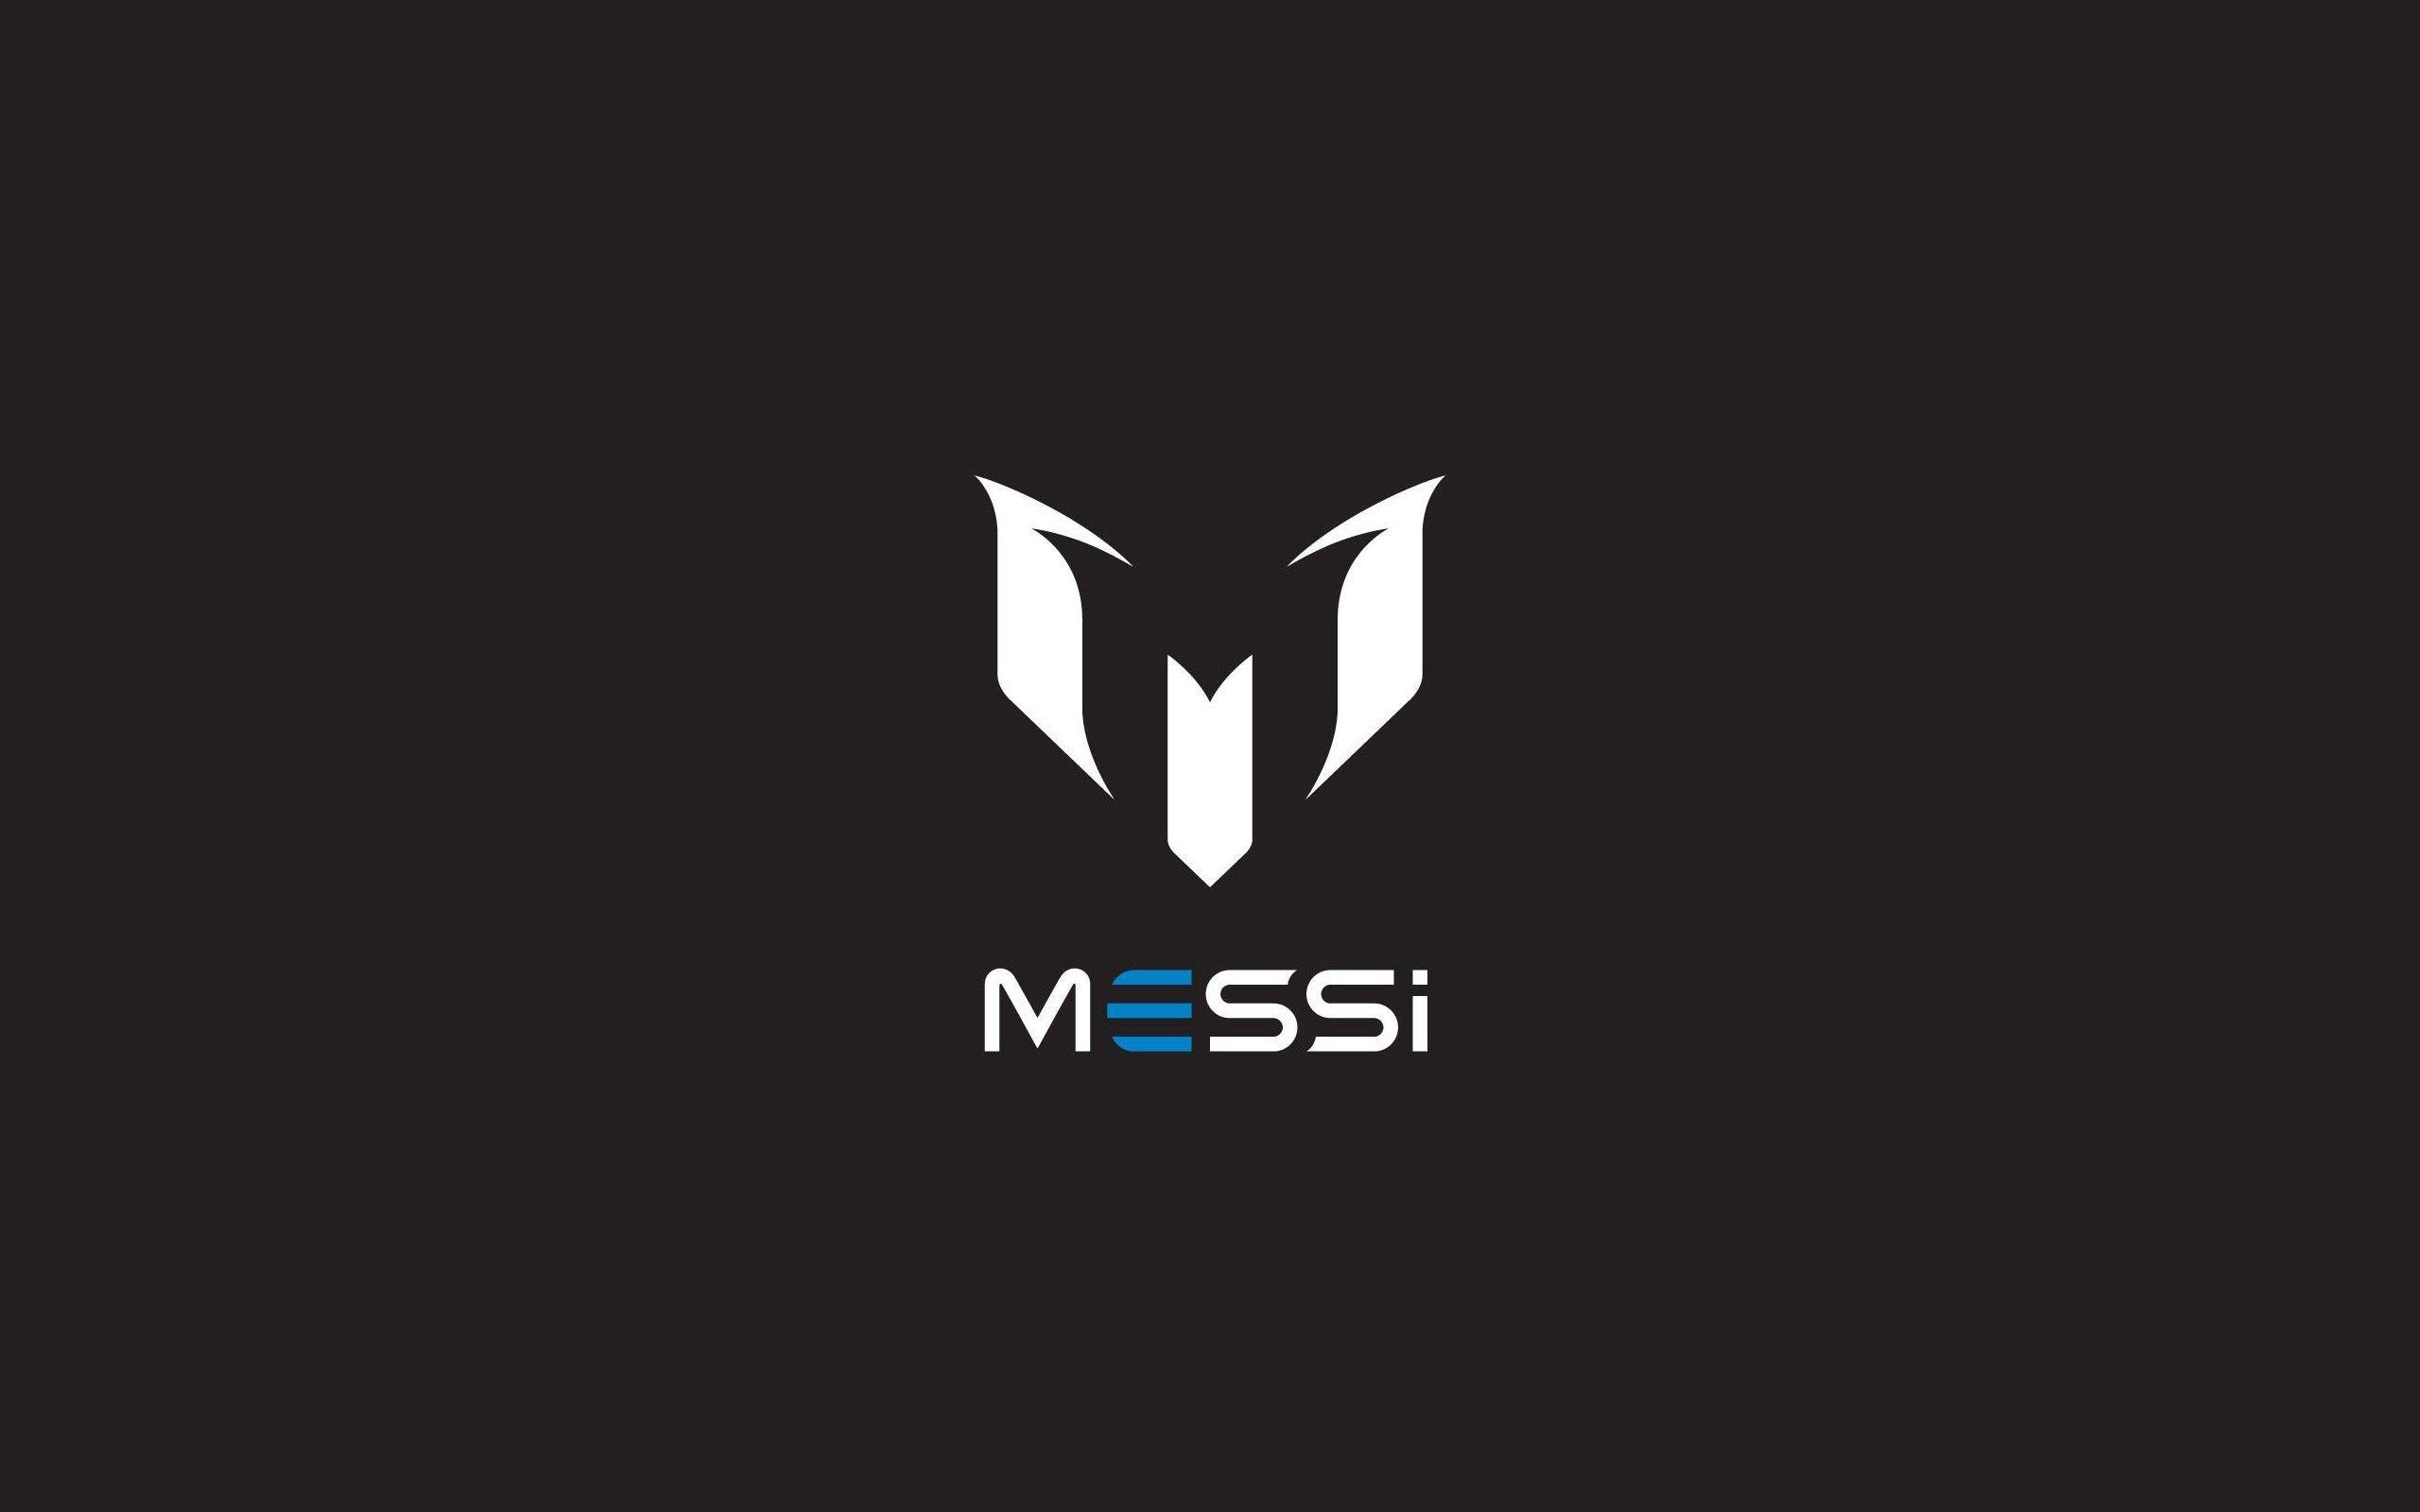 Messi logo Adidas wallpapers free desktop backgrounds and wallpapers